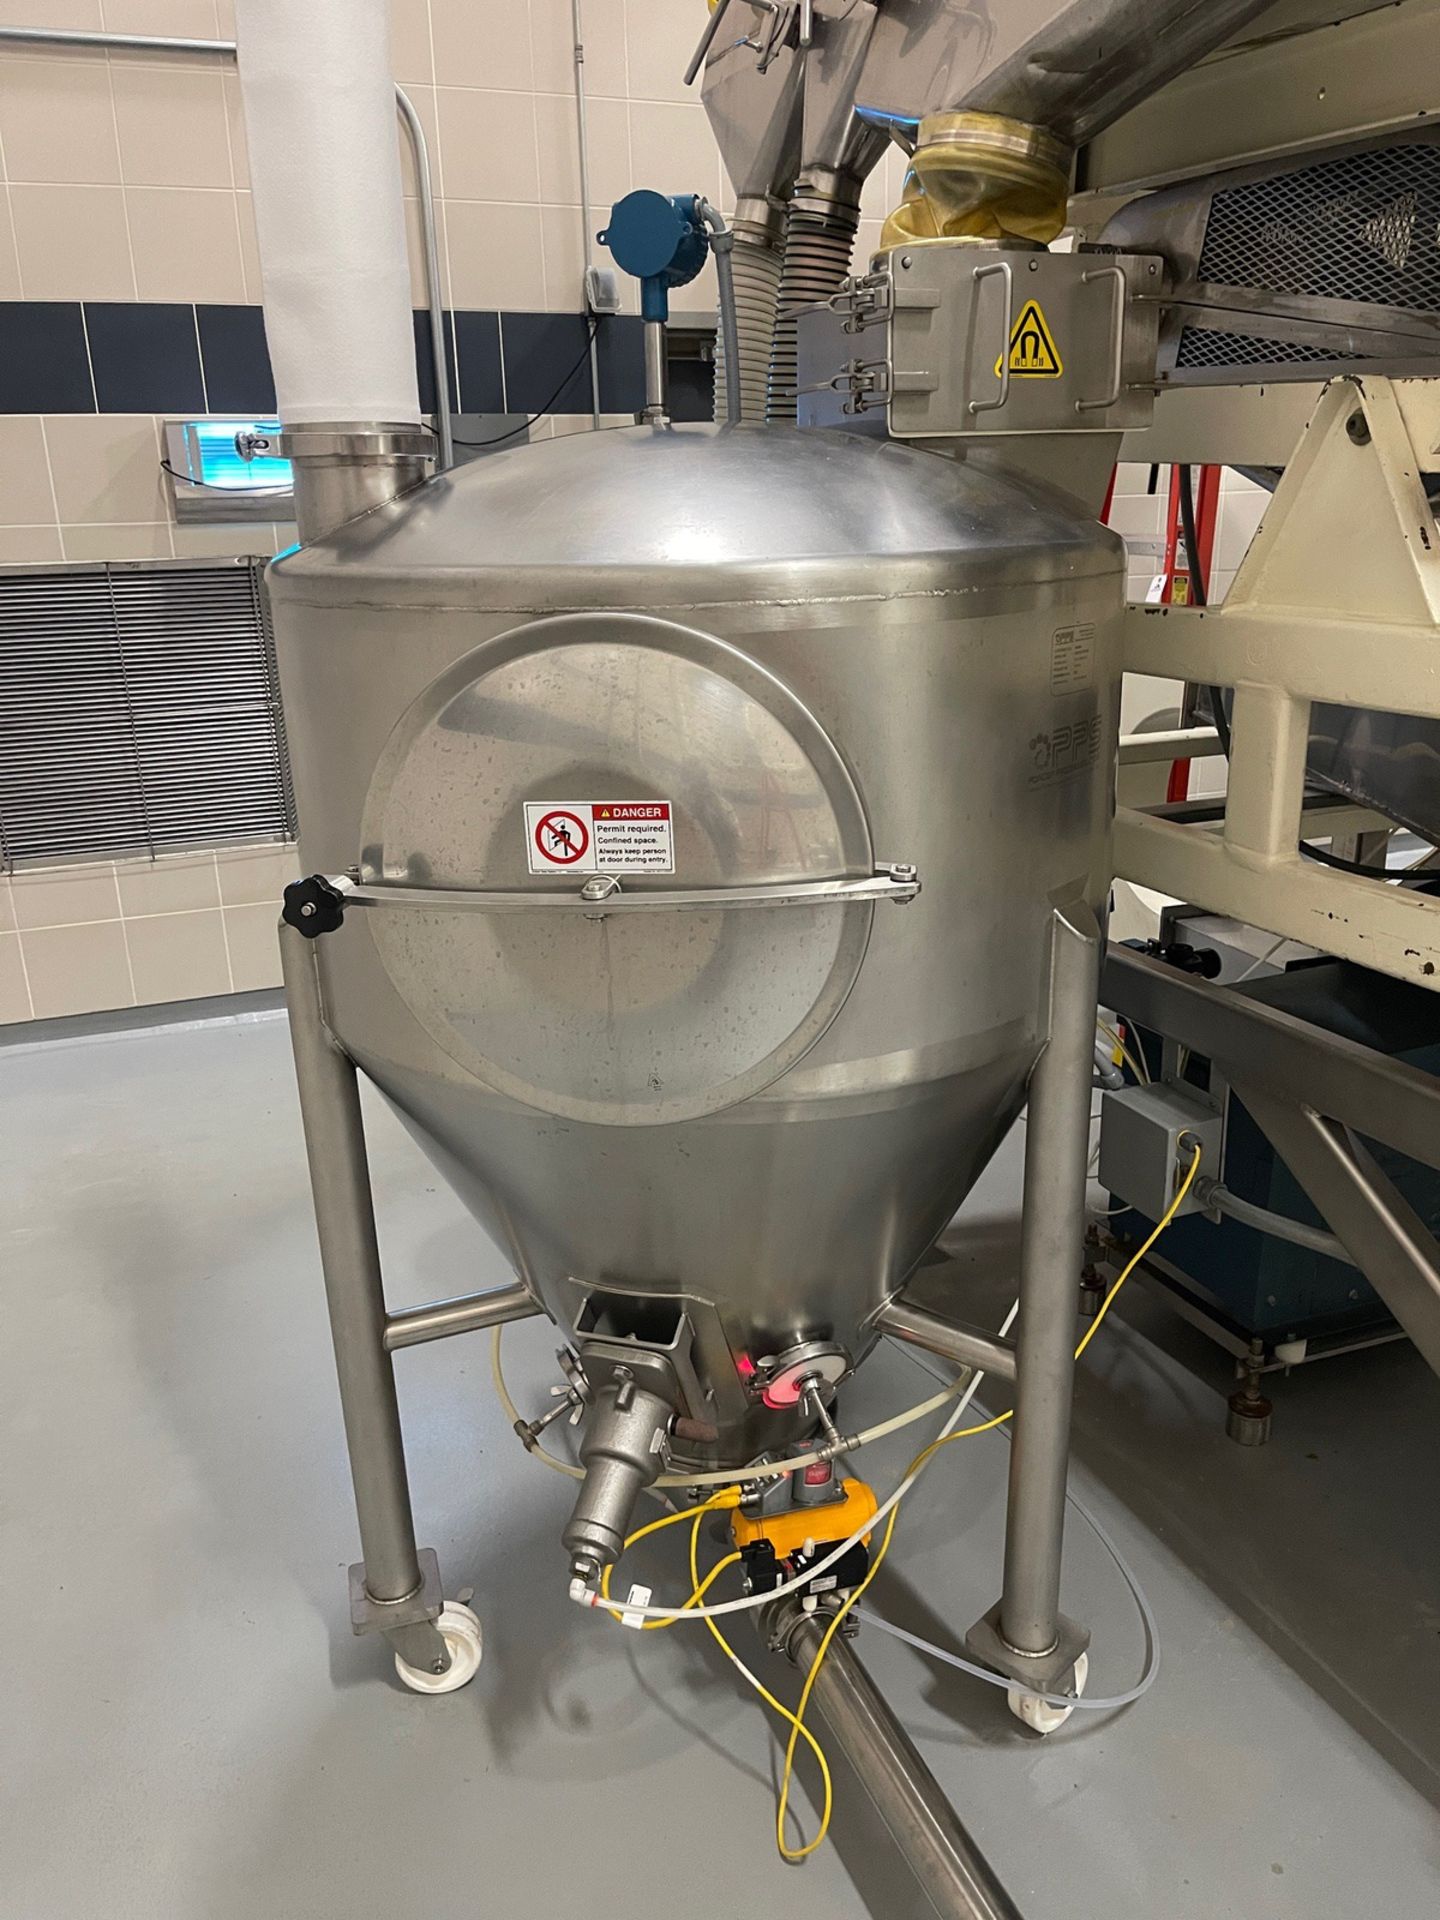 2013 PPS Super Sack Bulk Bag Filling System - Stainless Steel with Staircase; Mezza | Rig Fee $14000 - Image 3 of 17